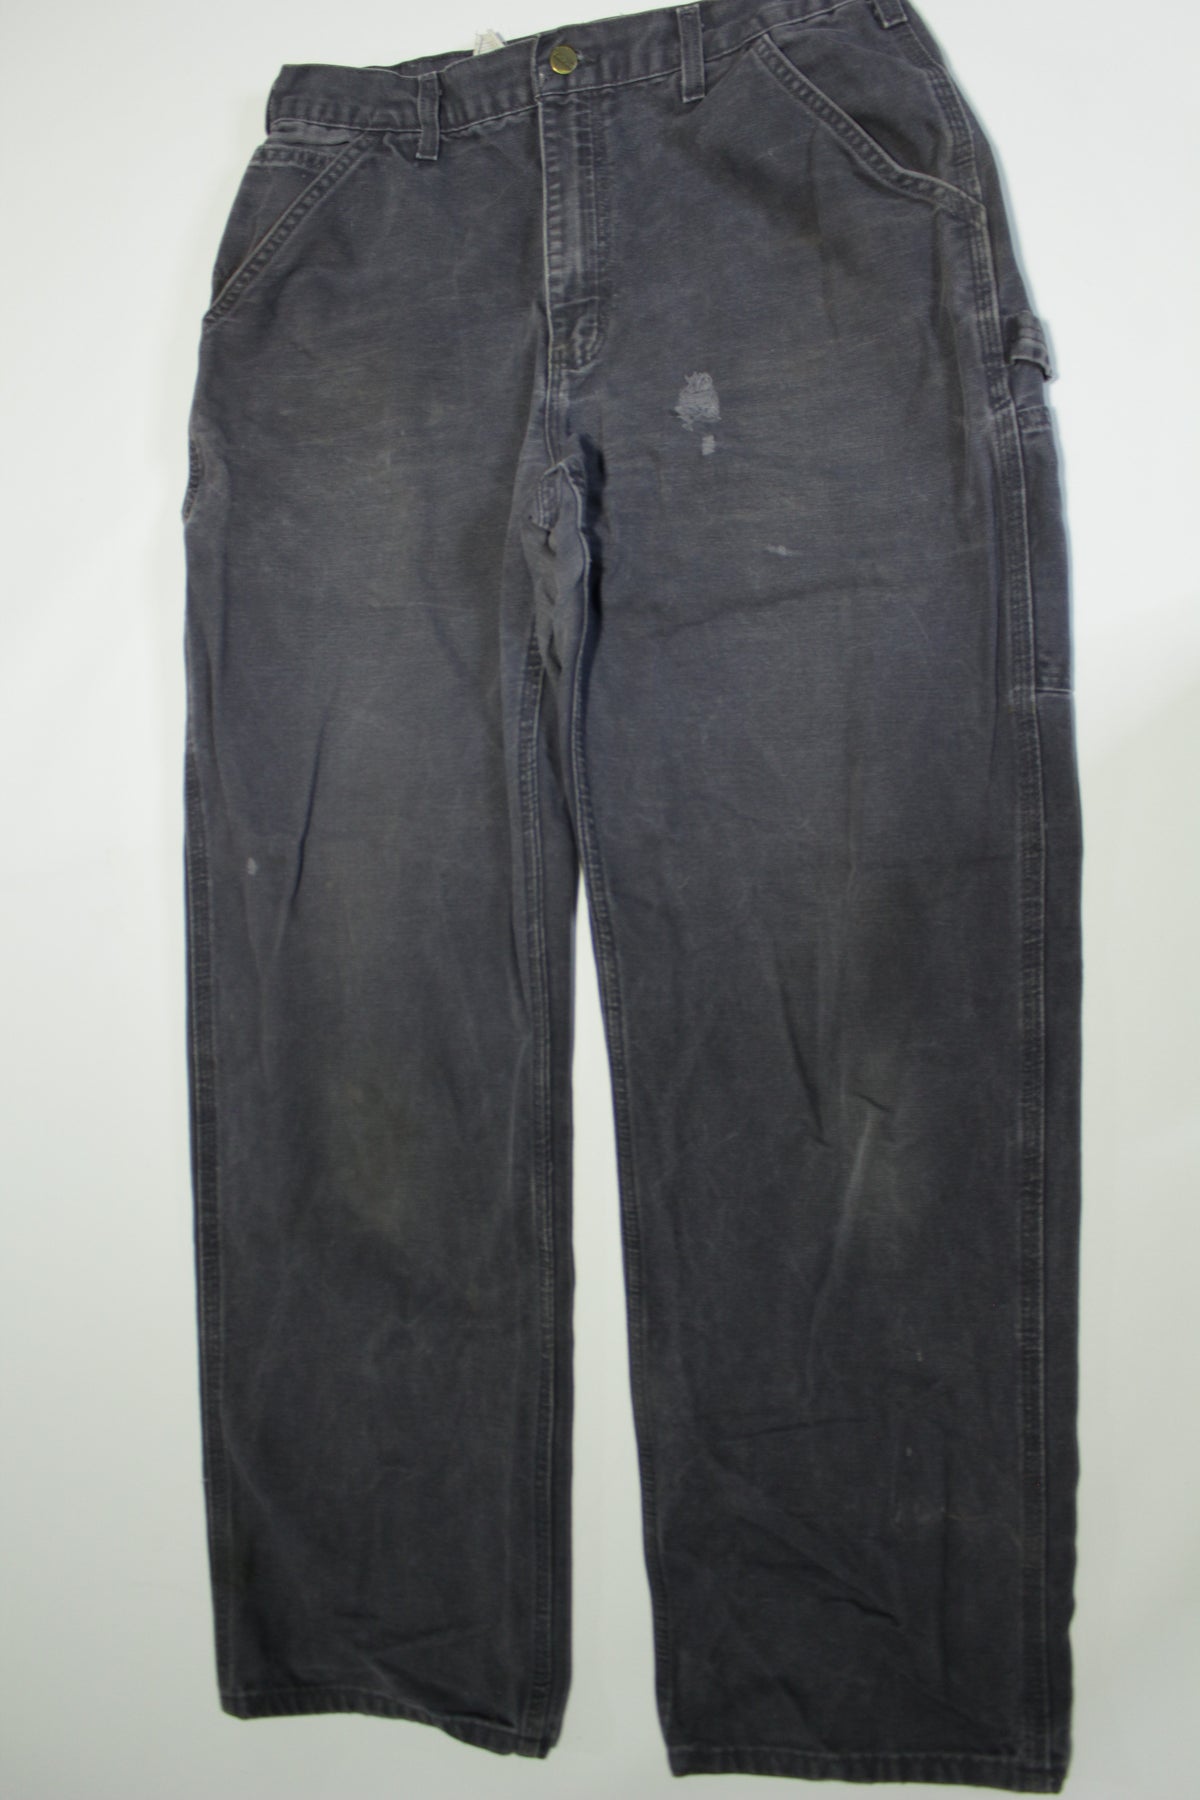 Carhartt B11 PTB Distressed Dungaree Fit Duck Wash Canvas Work Construction Pants